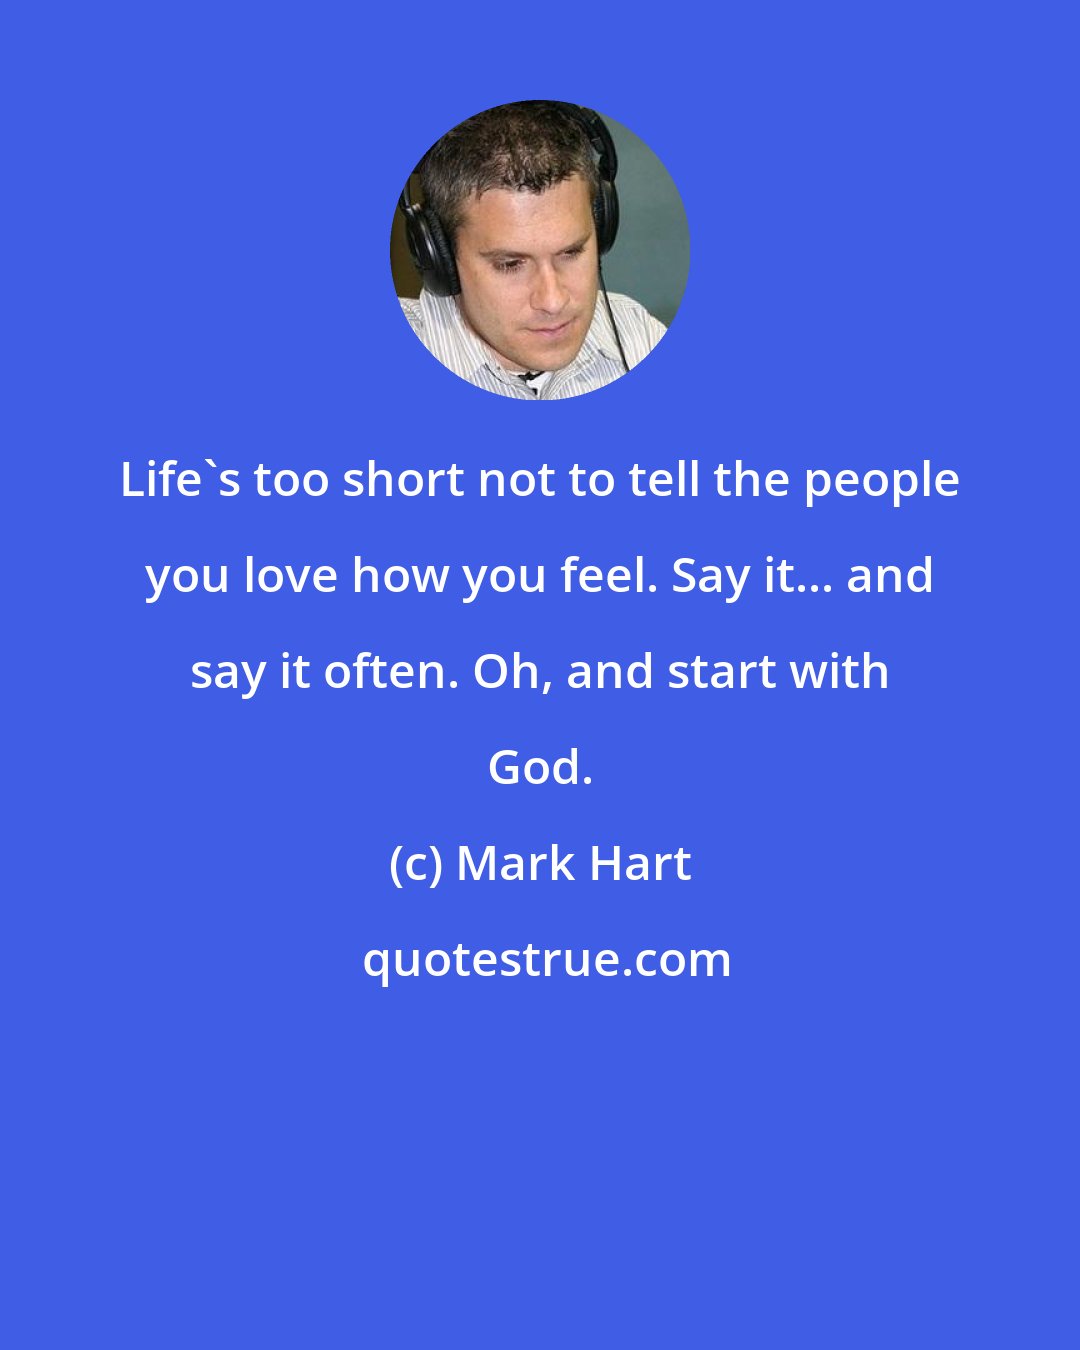 Mark Hart: Life's too short not to tell the people you love how you feel. Say it... and say it often. Oh, and start with God.